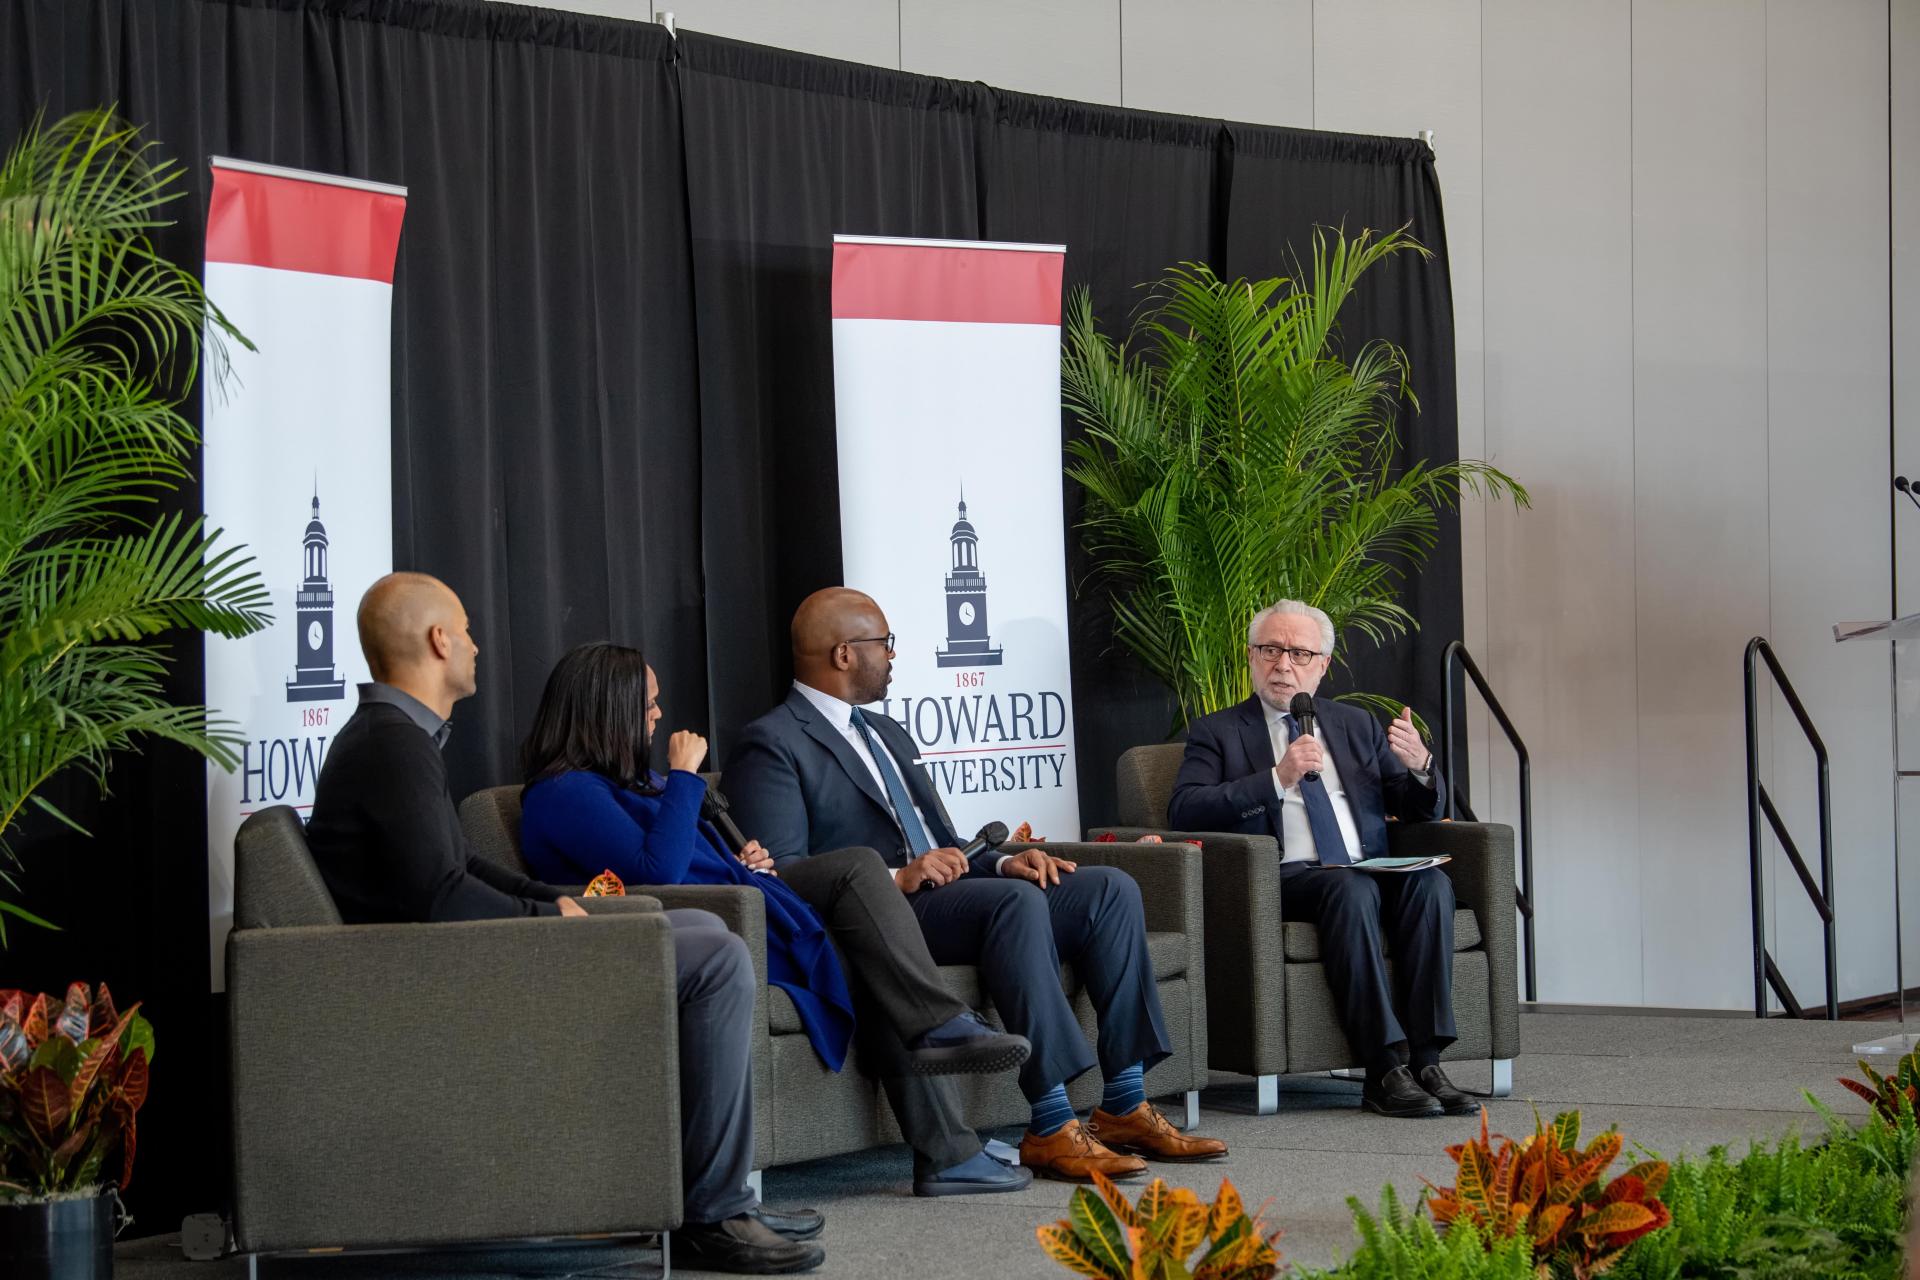 CNN Anchors Wolf Blitzer, Victor Blackwell Bring Seasoned Journalists, Media Professionals to Howard’s Campus